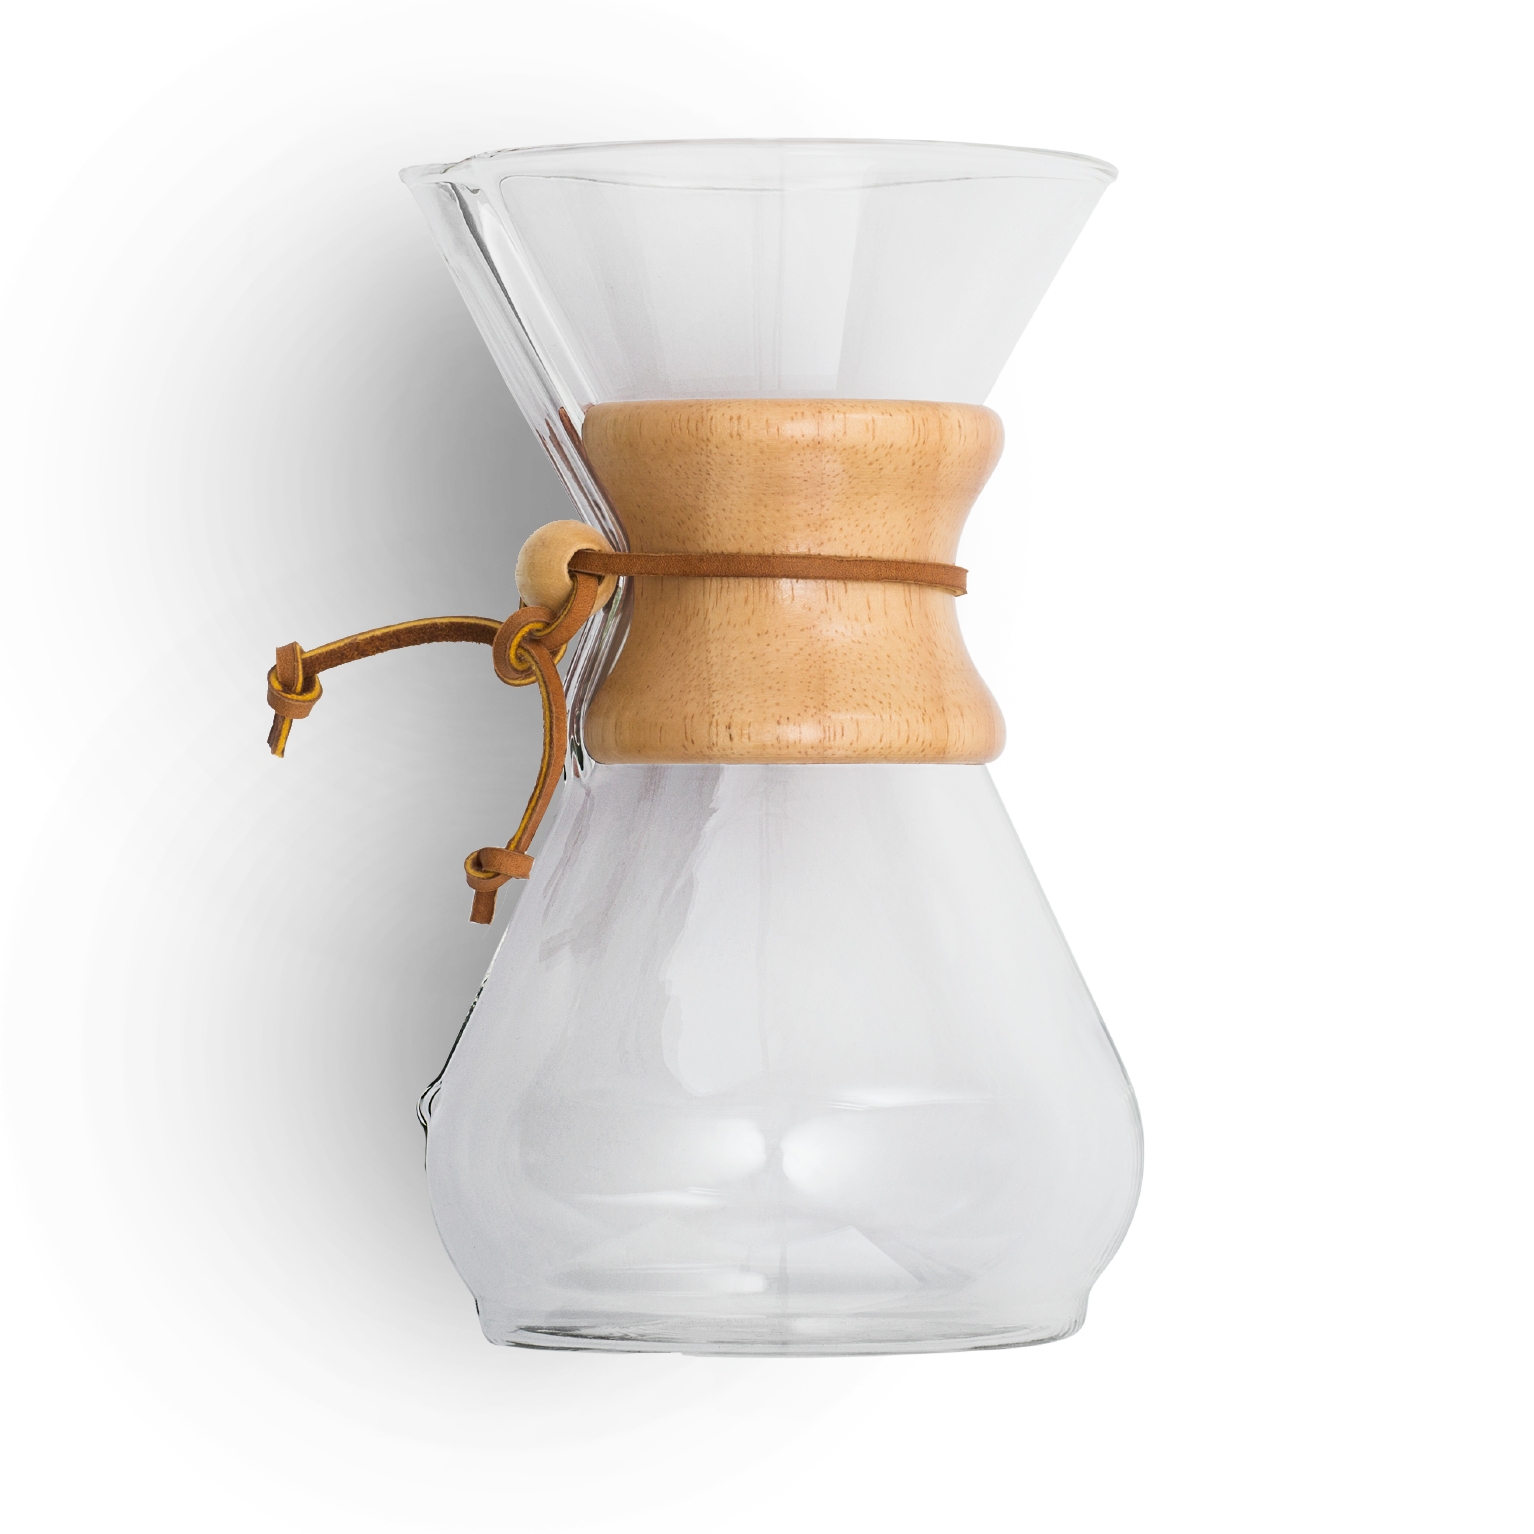 Chemex 6-Cup Glass Pour-Over Coffee Maker with Natural Wood Collar +  Reviews